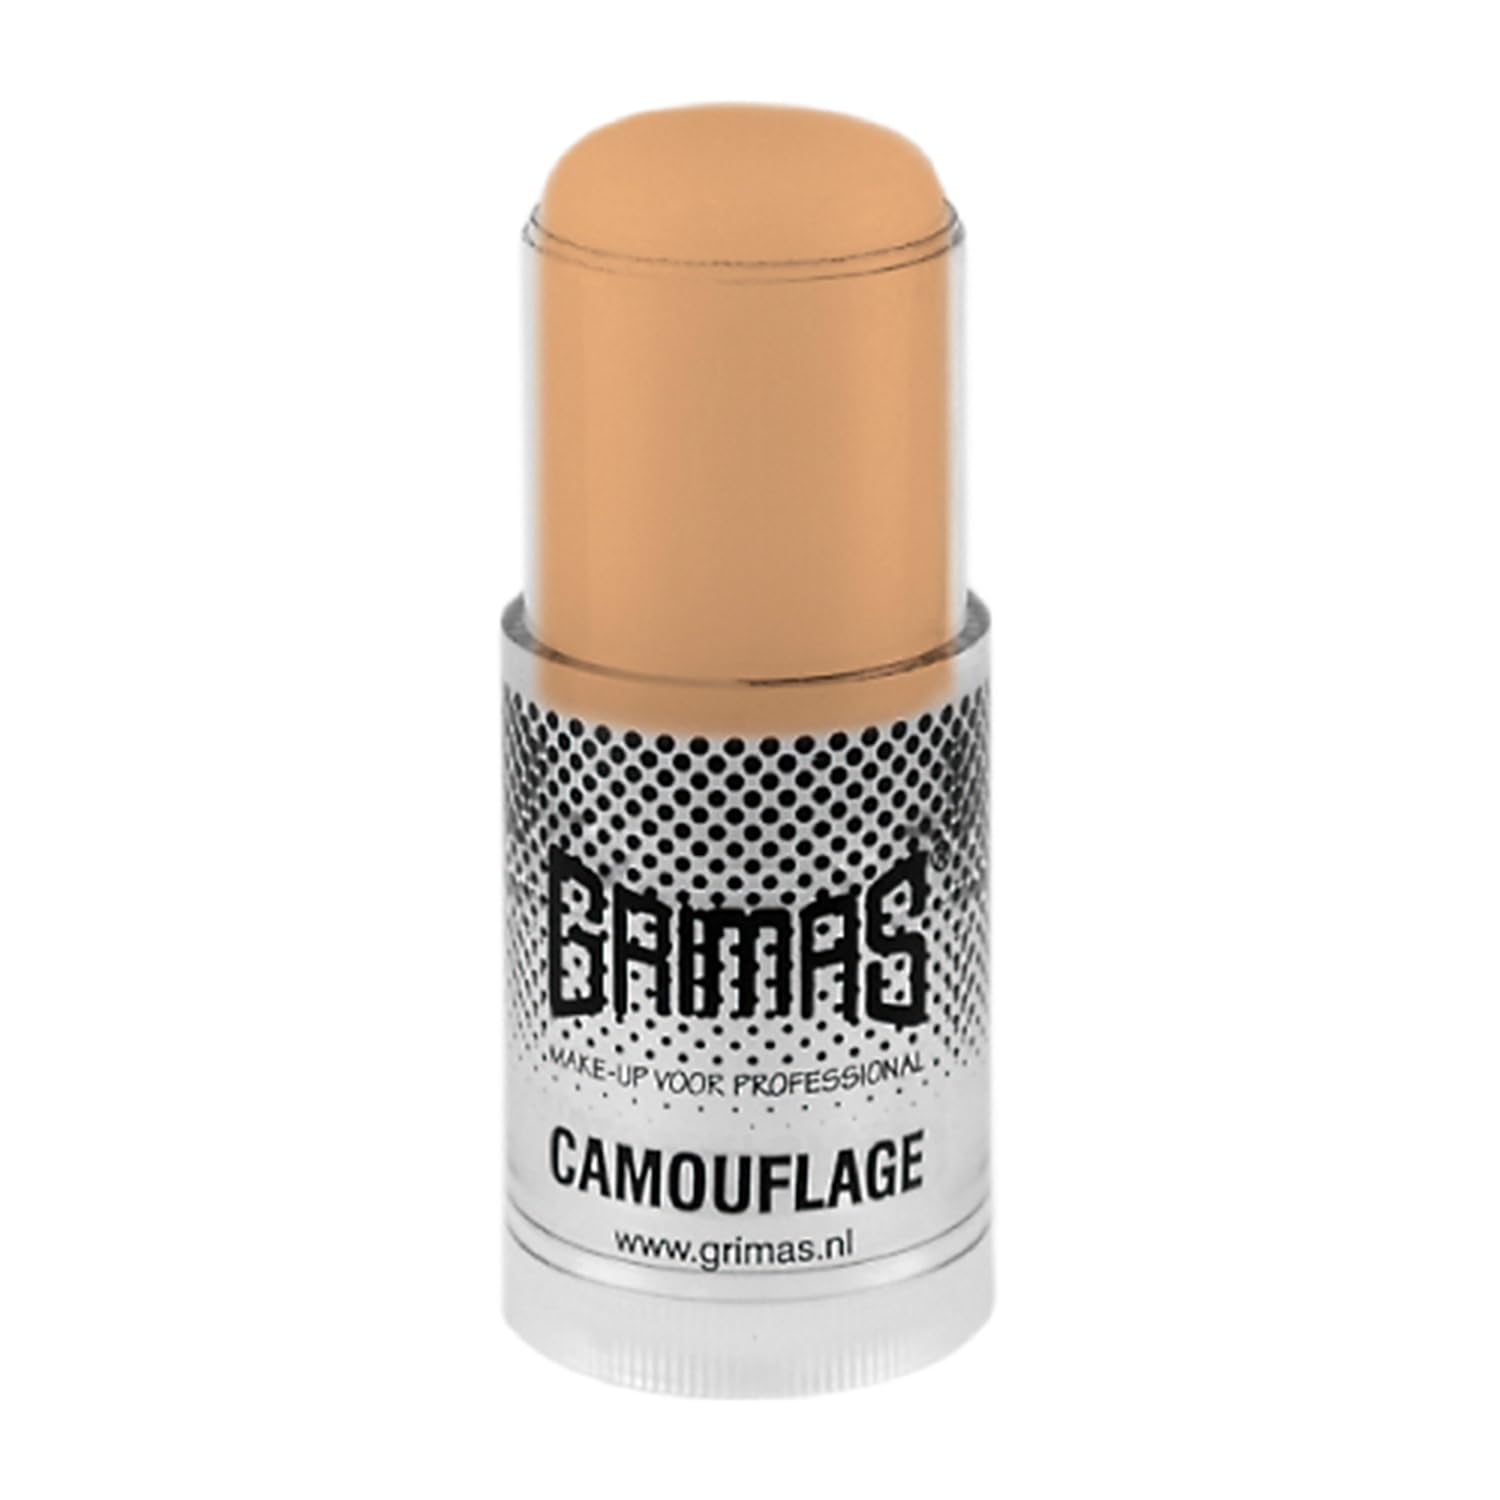 GRIMAS Professional Concealer Camouflage Stick, 23 ml, Skin Colour W5, Professional High Coverage and Concealing Makeup for Tattoos, Fire Paints, Dark Circles, Pigment Spots and Much More